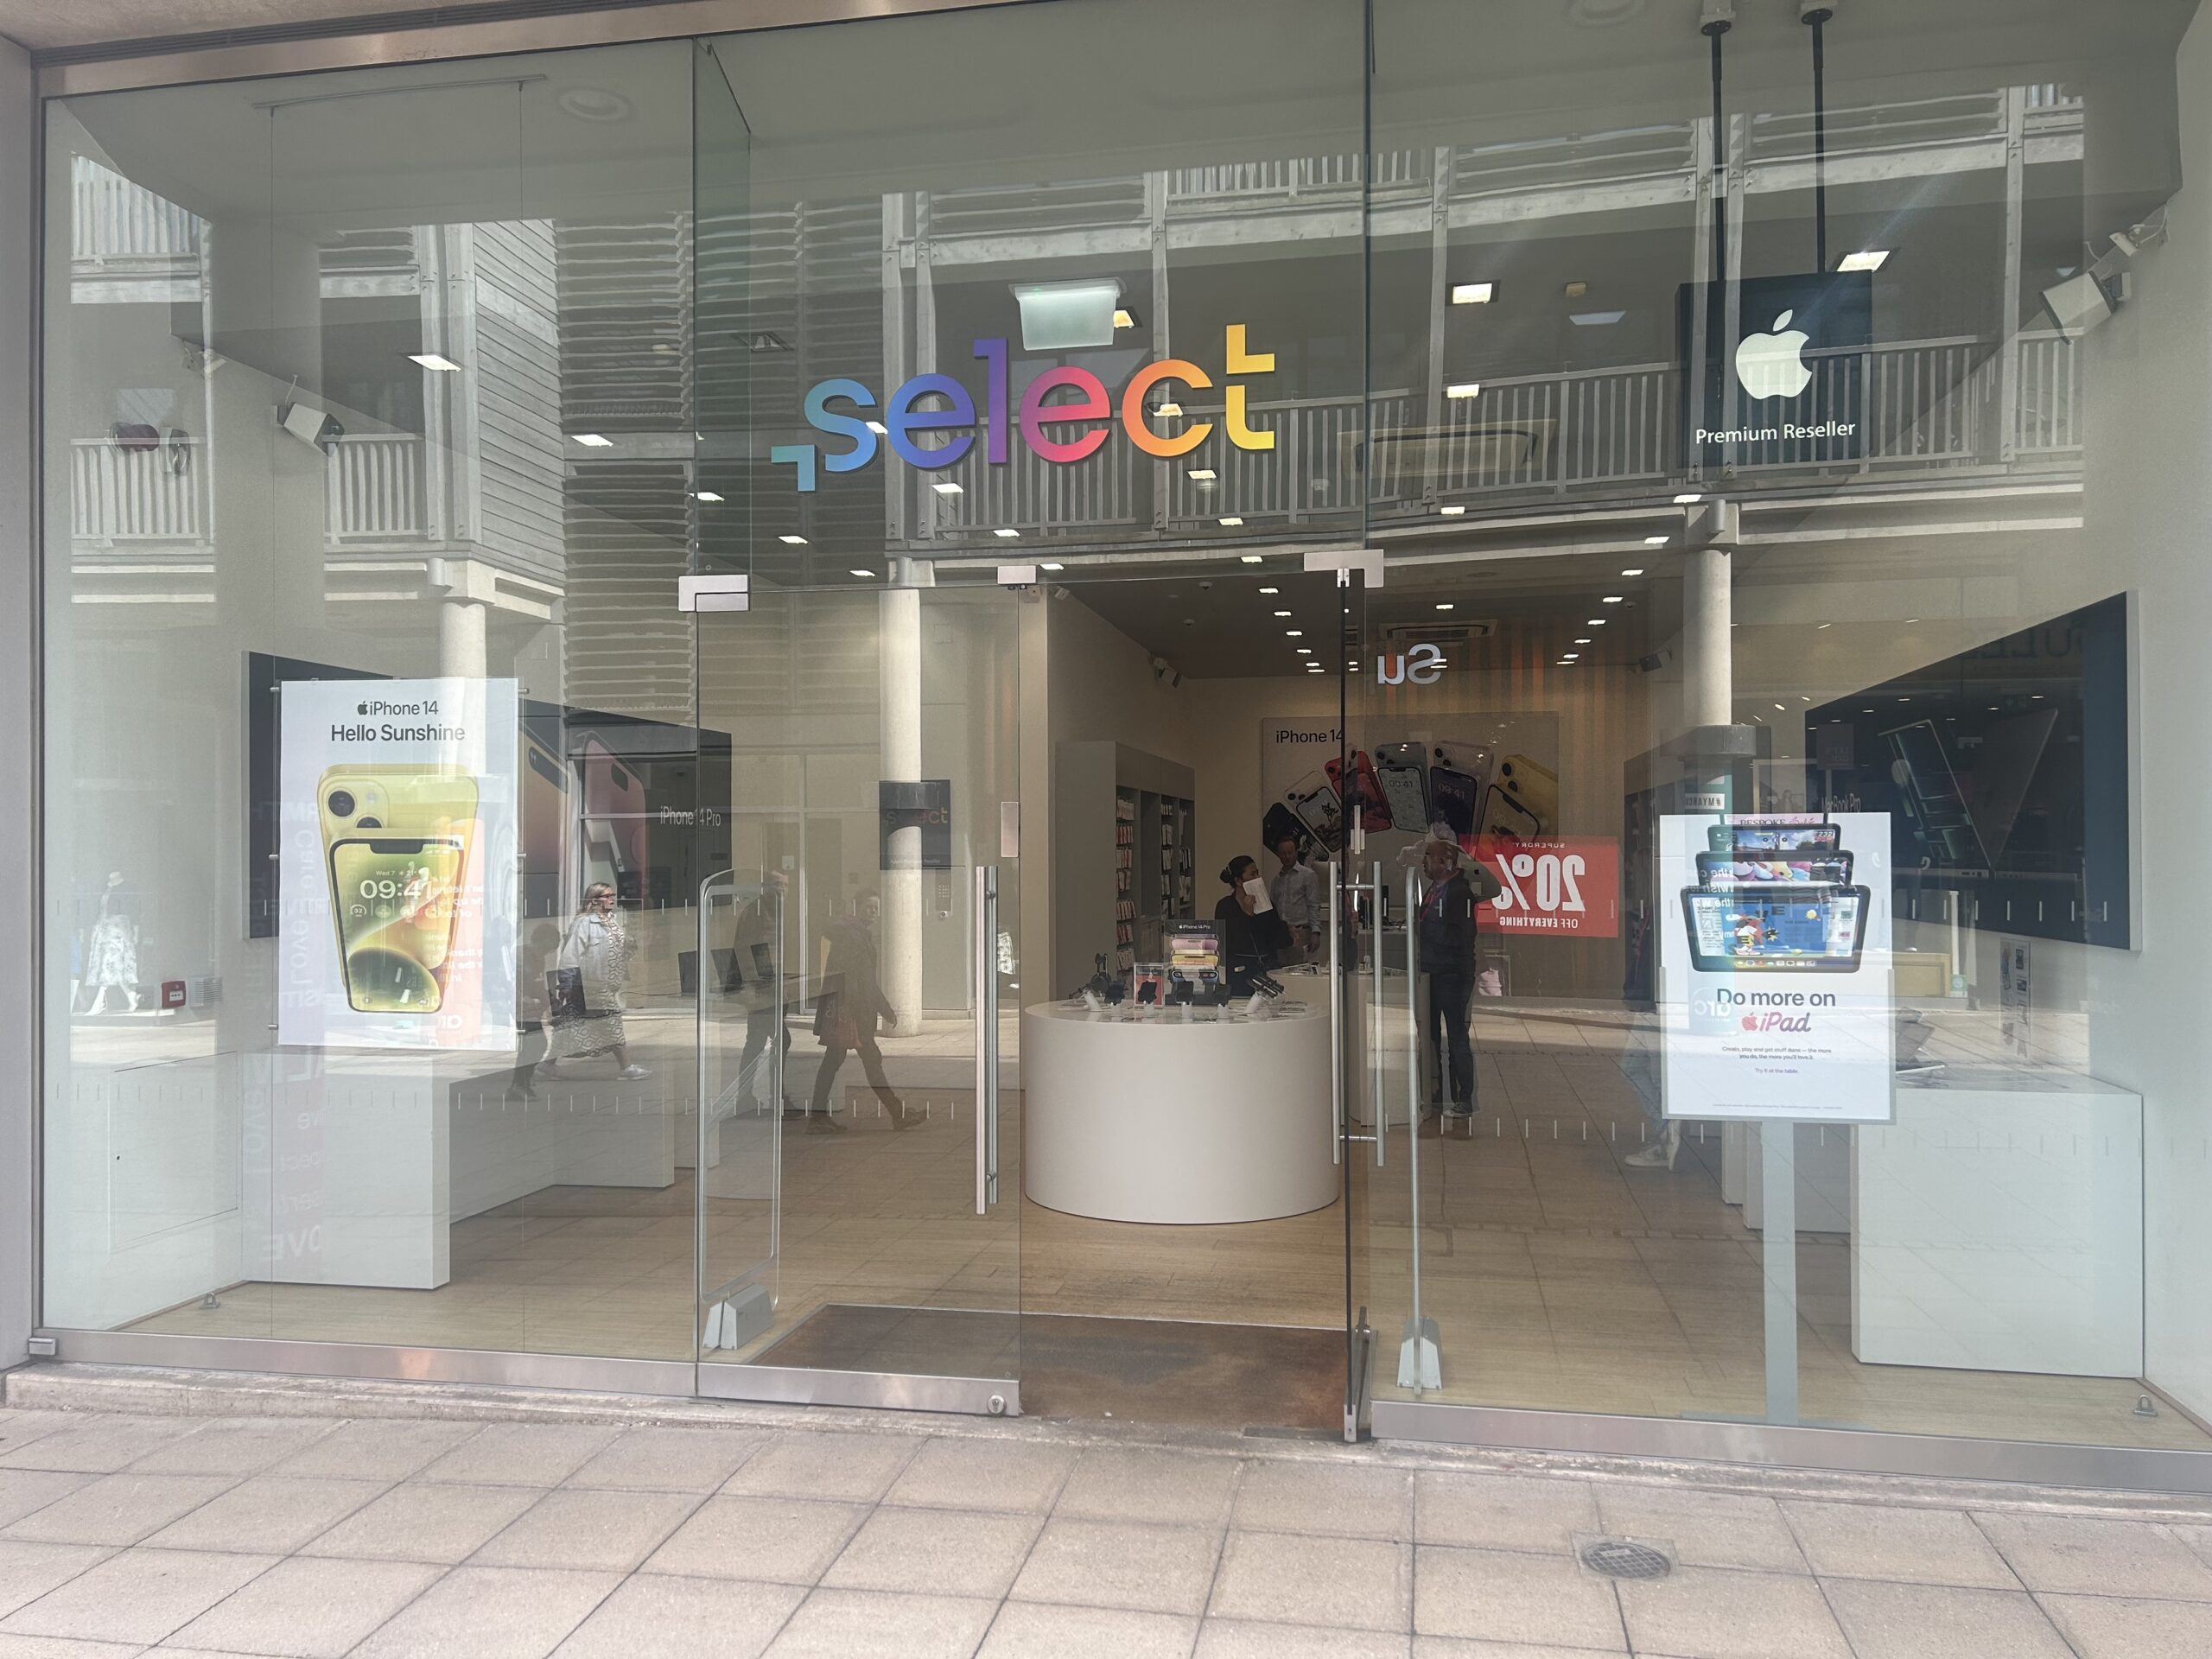 The glass exterior of the select store